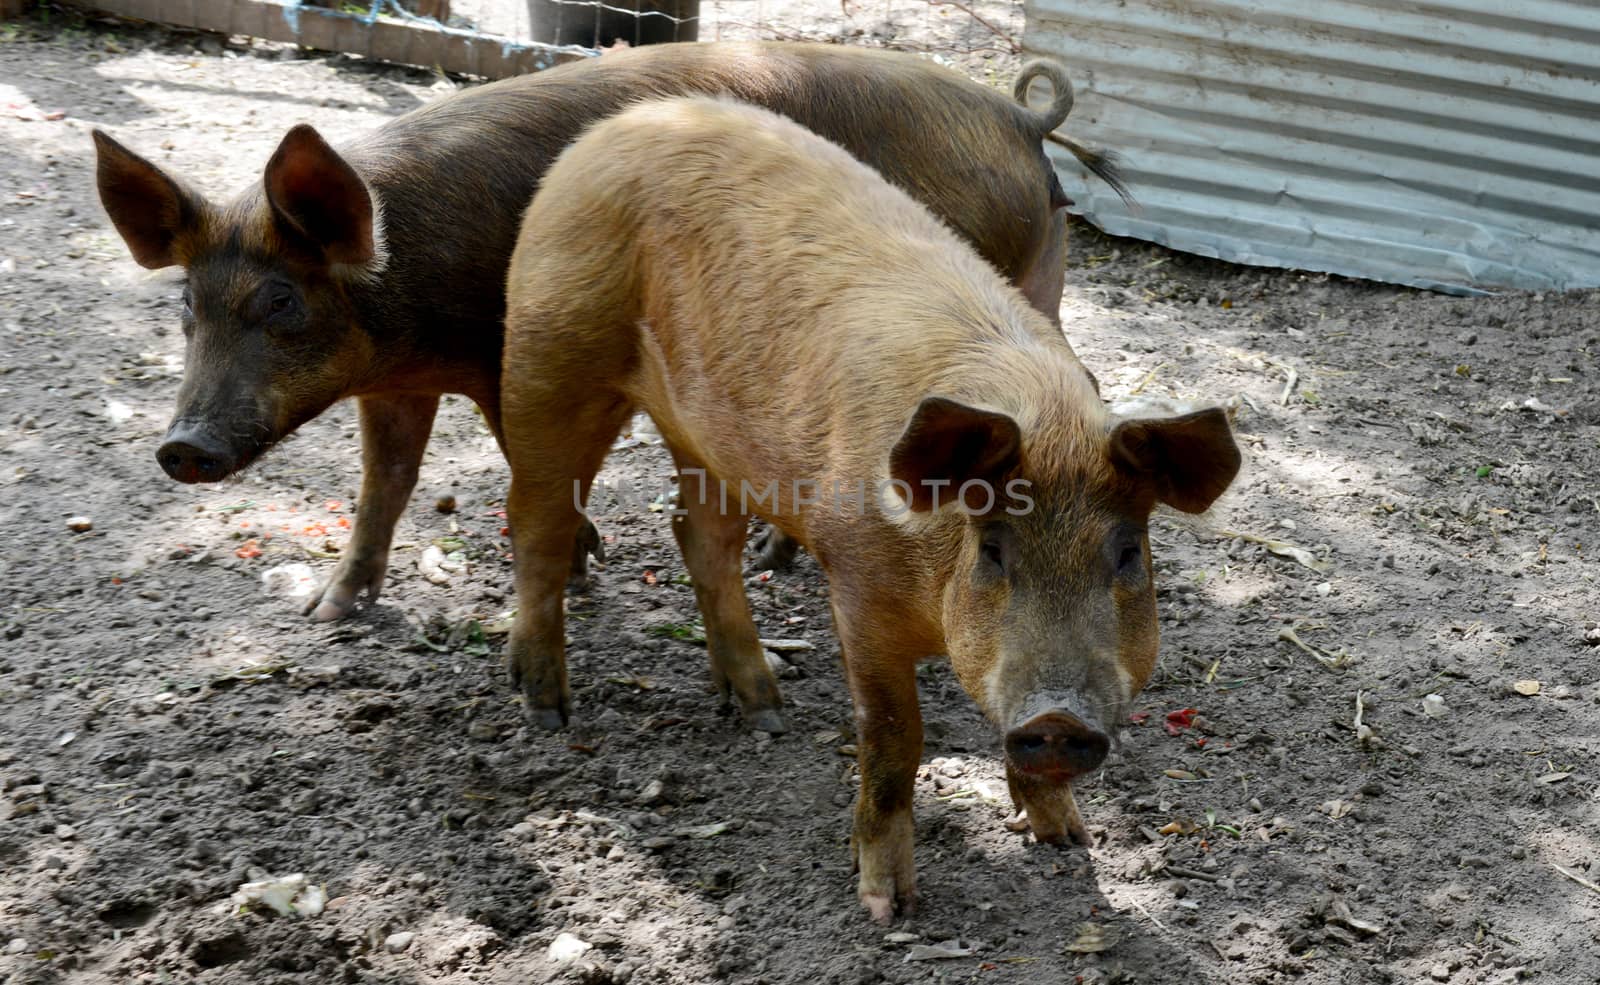 two pigs on a farm playing in dirt
